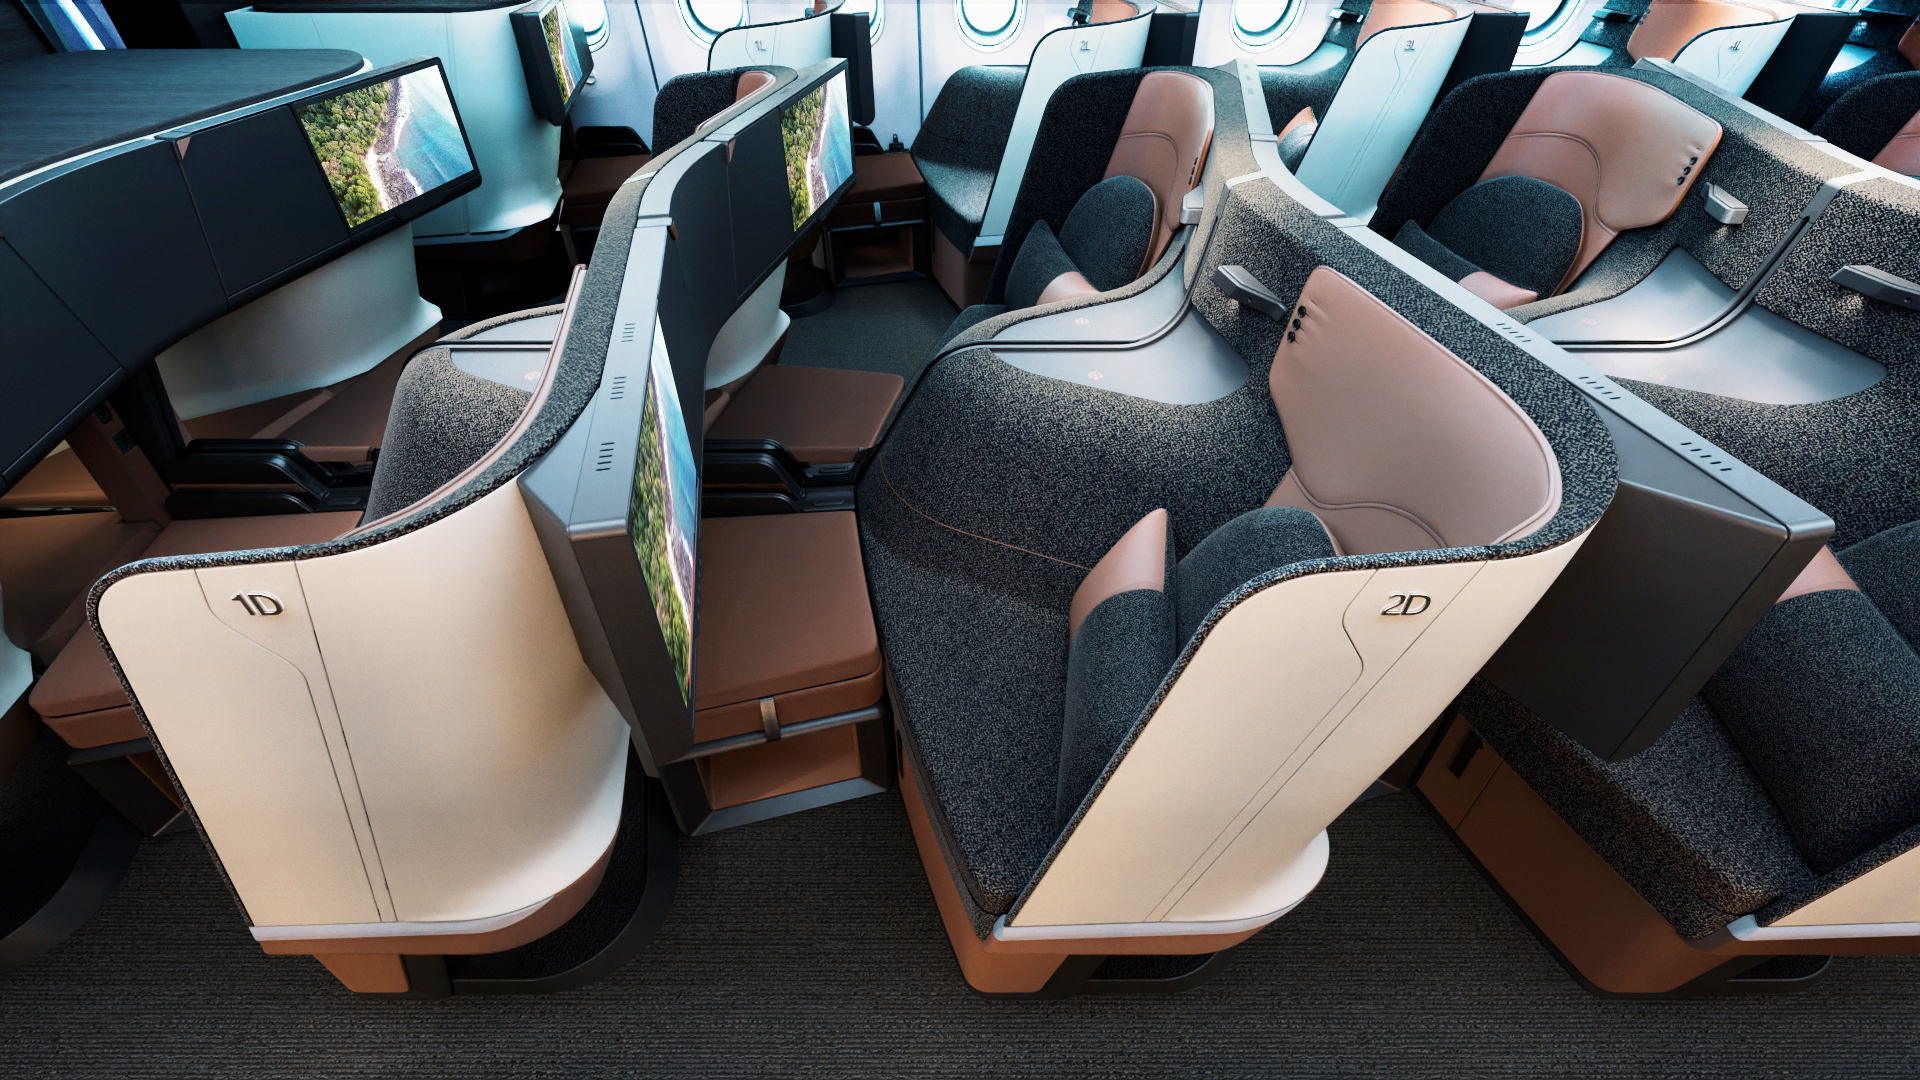 Revolutionize Your Flight Experience with New, Stylish Sofa-Style Airline Seats!